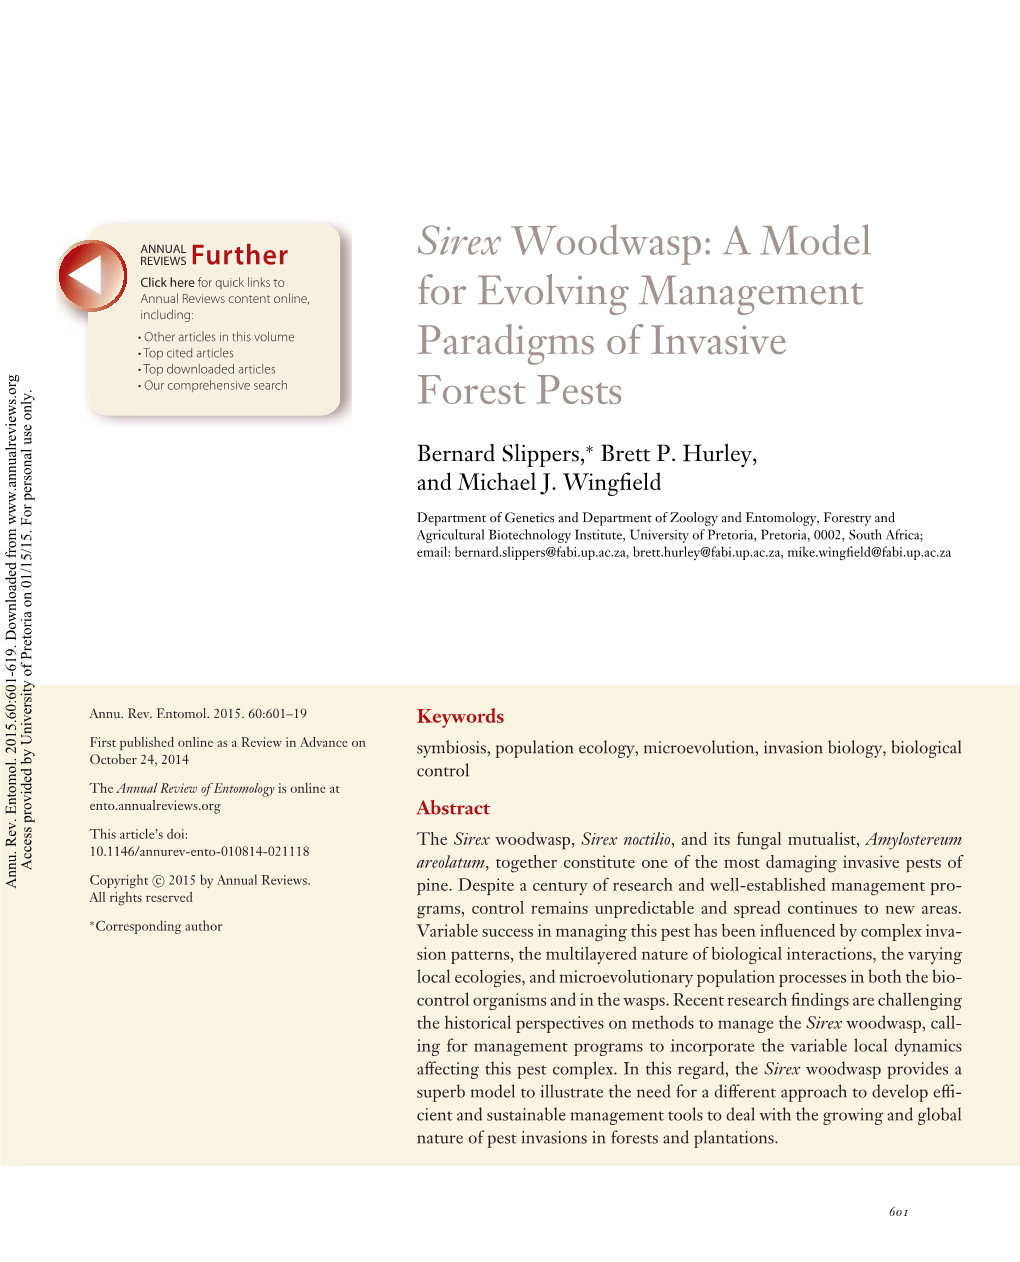 Sirex Woodwasp: a Model for Evolving Management Paradigms of Invasive Forest Pests